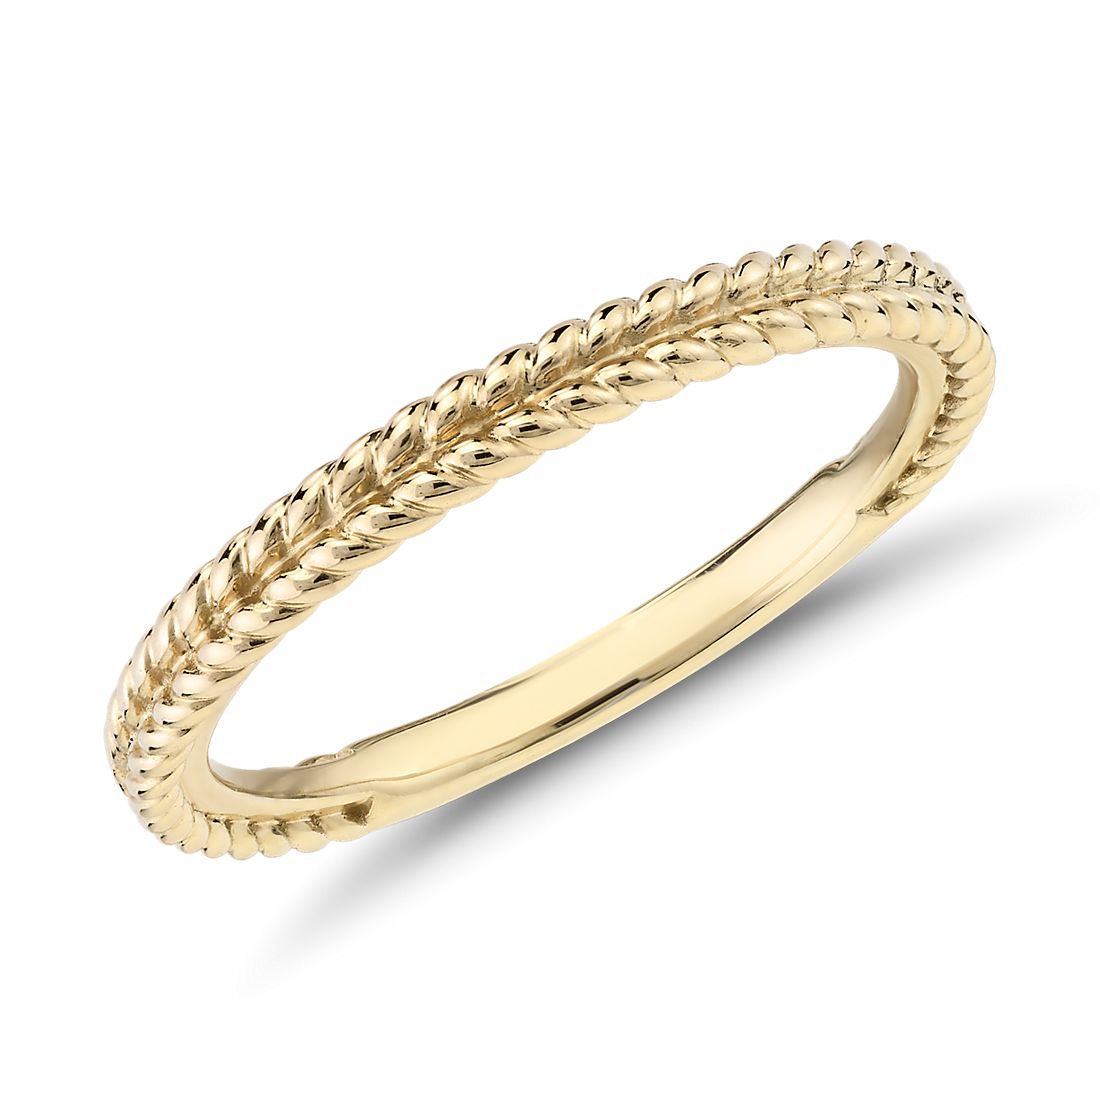 Braided Wedding Band in 14k Yellow Gold